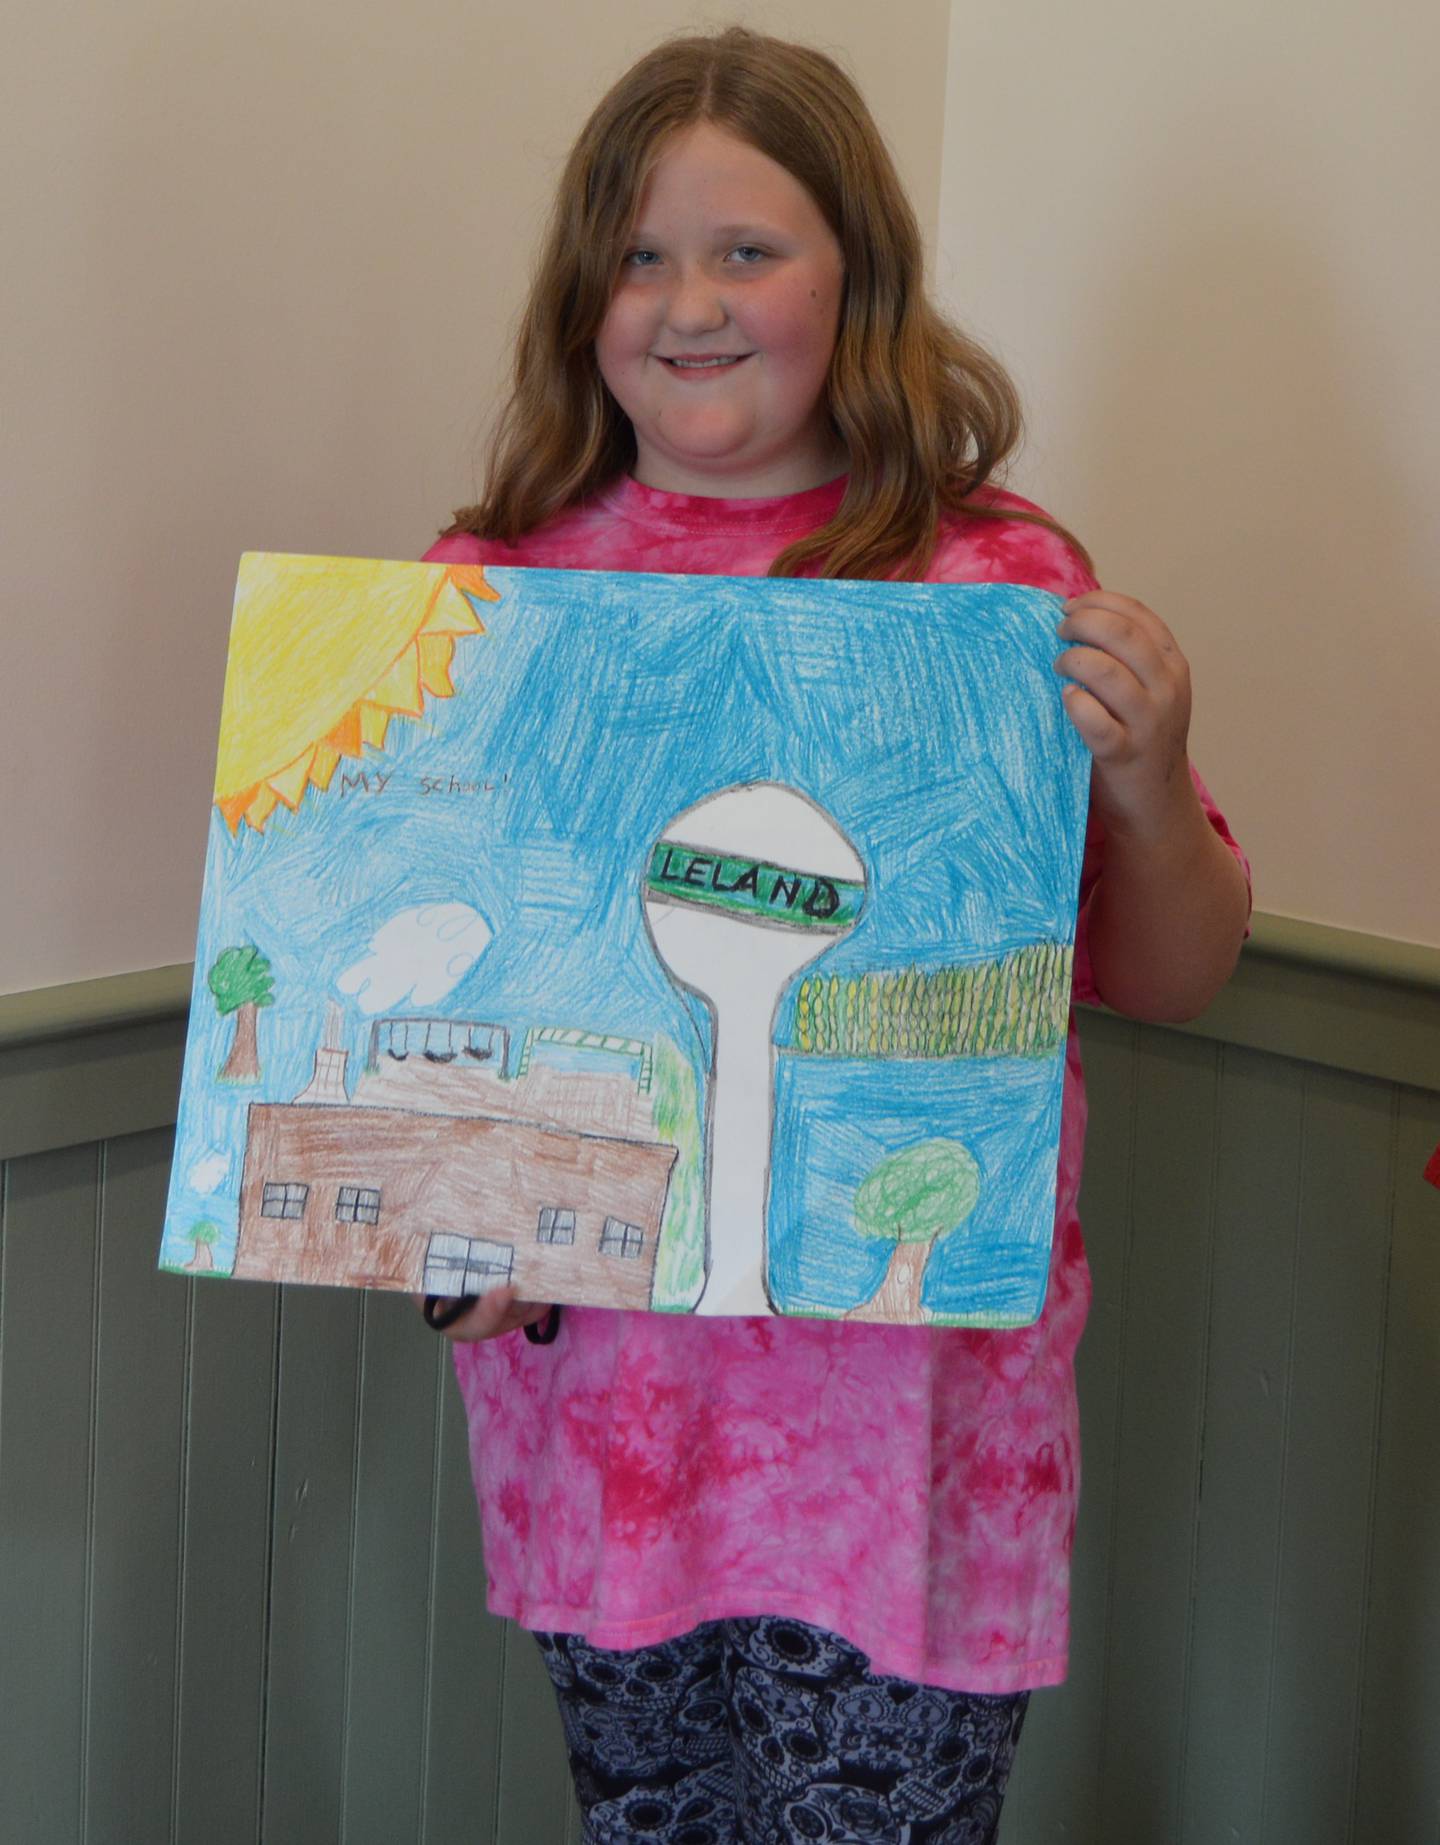 Willow Huntington, fourth grader at Leland Elementary, shows off her artwork.